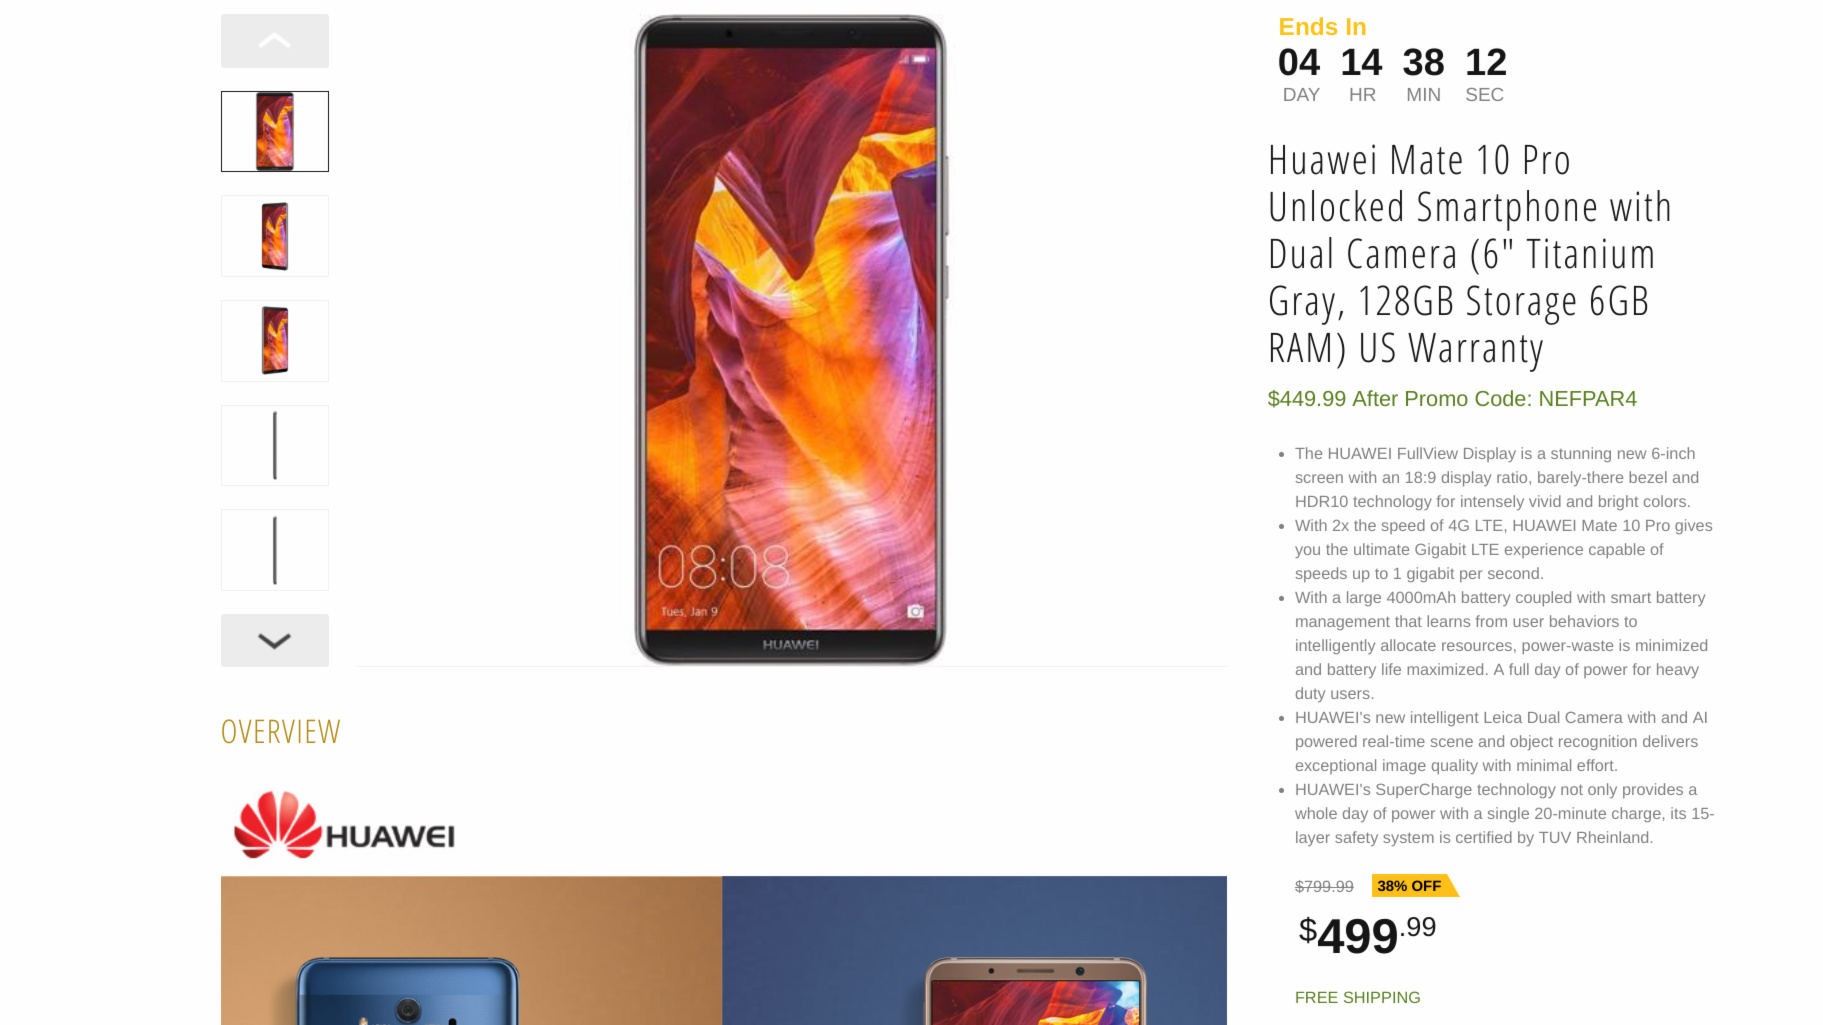 Deal on the Huawei Mate 10 Pro